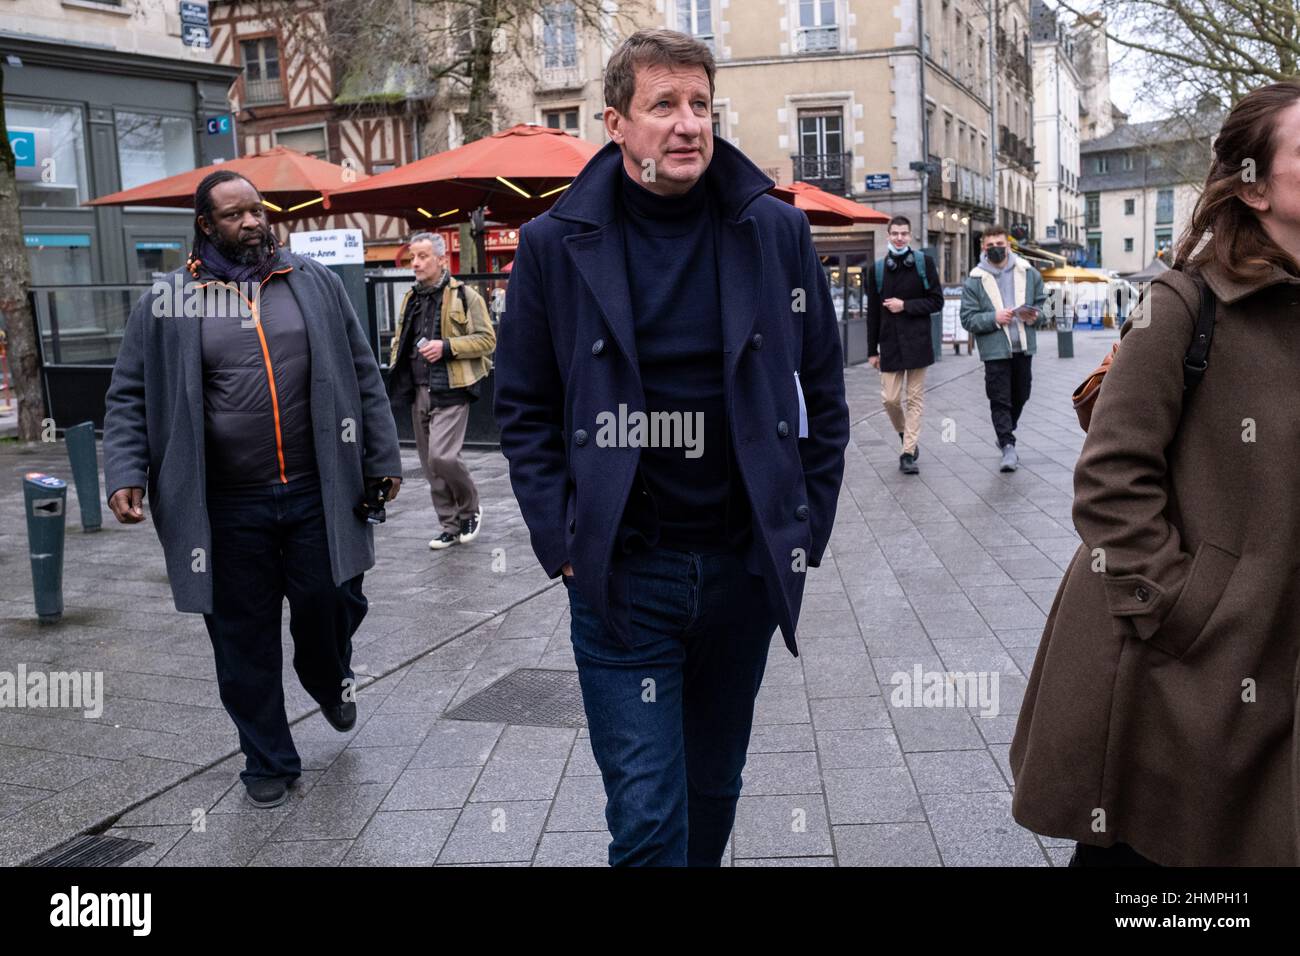 Yannick Jadot, Member of the European Parliament and candidate for the presidential election of the Europe Ecologie Les Verts (EELV) party, in Rennes to hold a meeting on the Place Hoche. Rennes, Brittany. France. Stock Photo